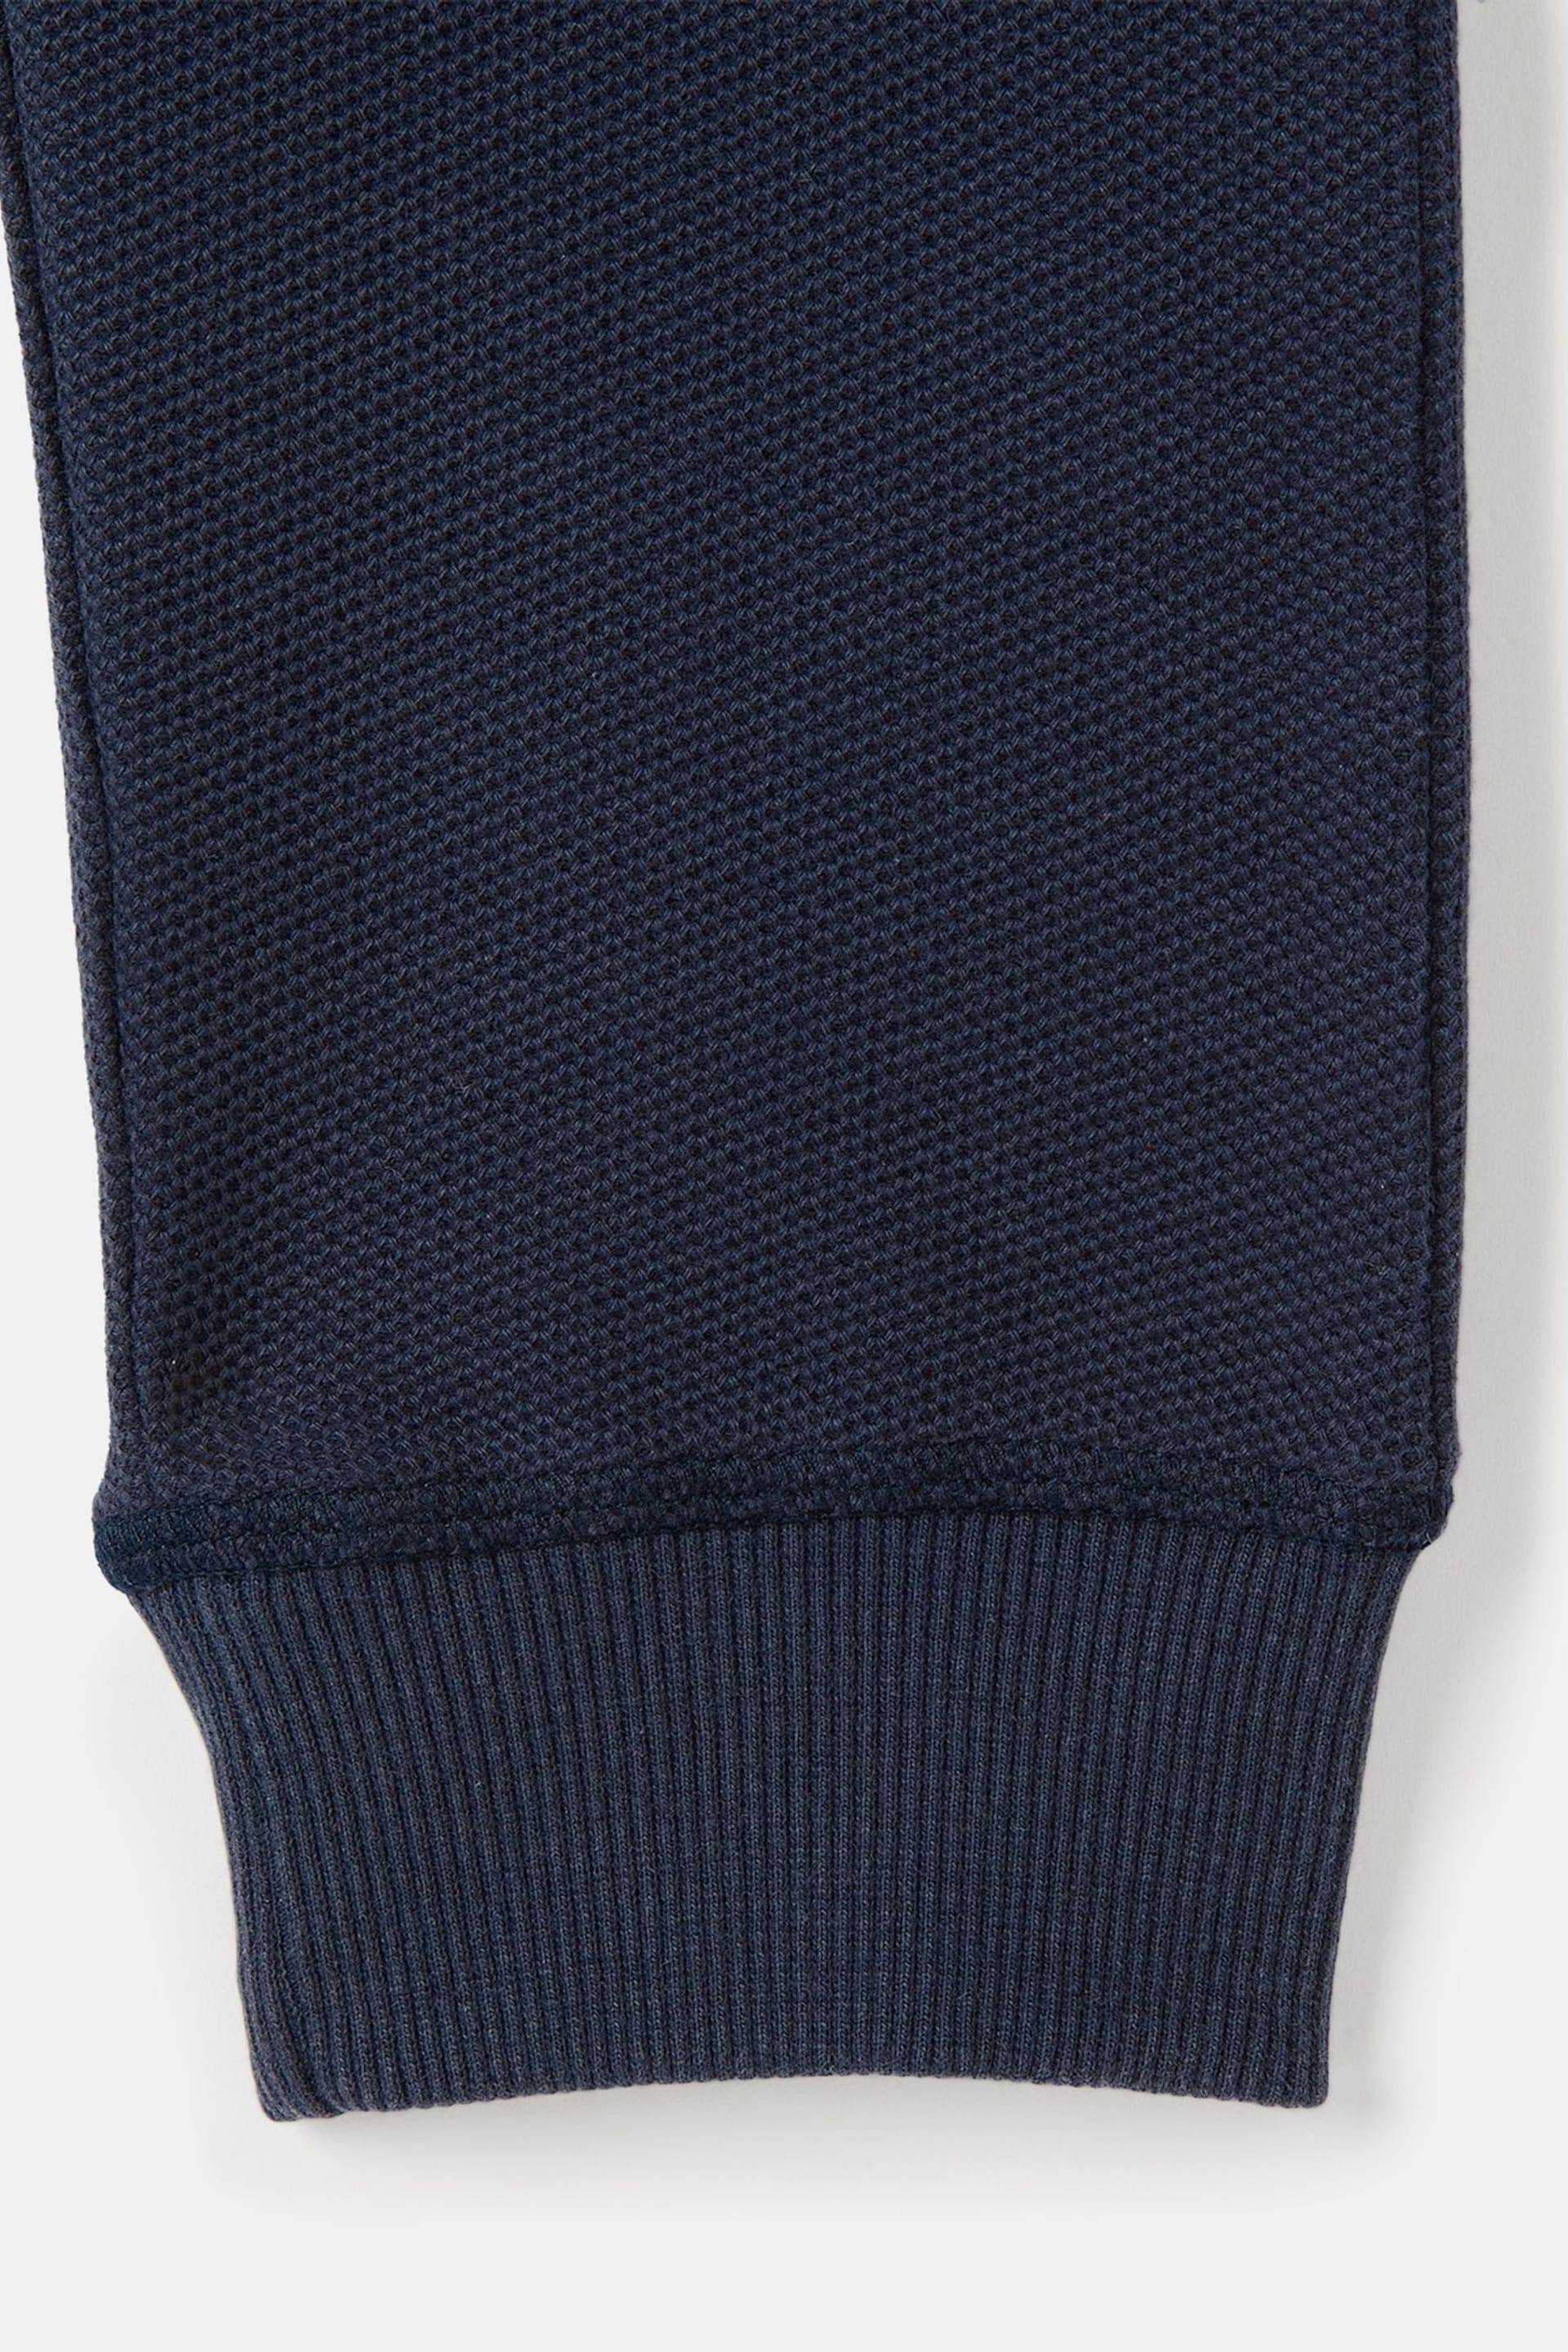 Joules Sid Navy Blue Cotton Joggers - Image 4 of 6